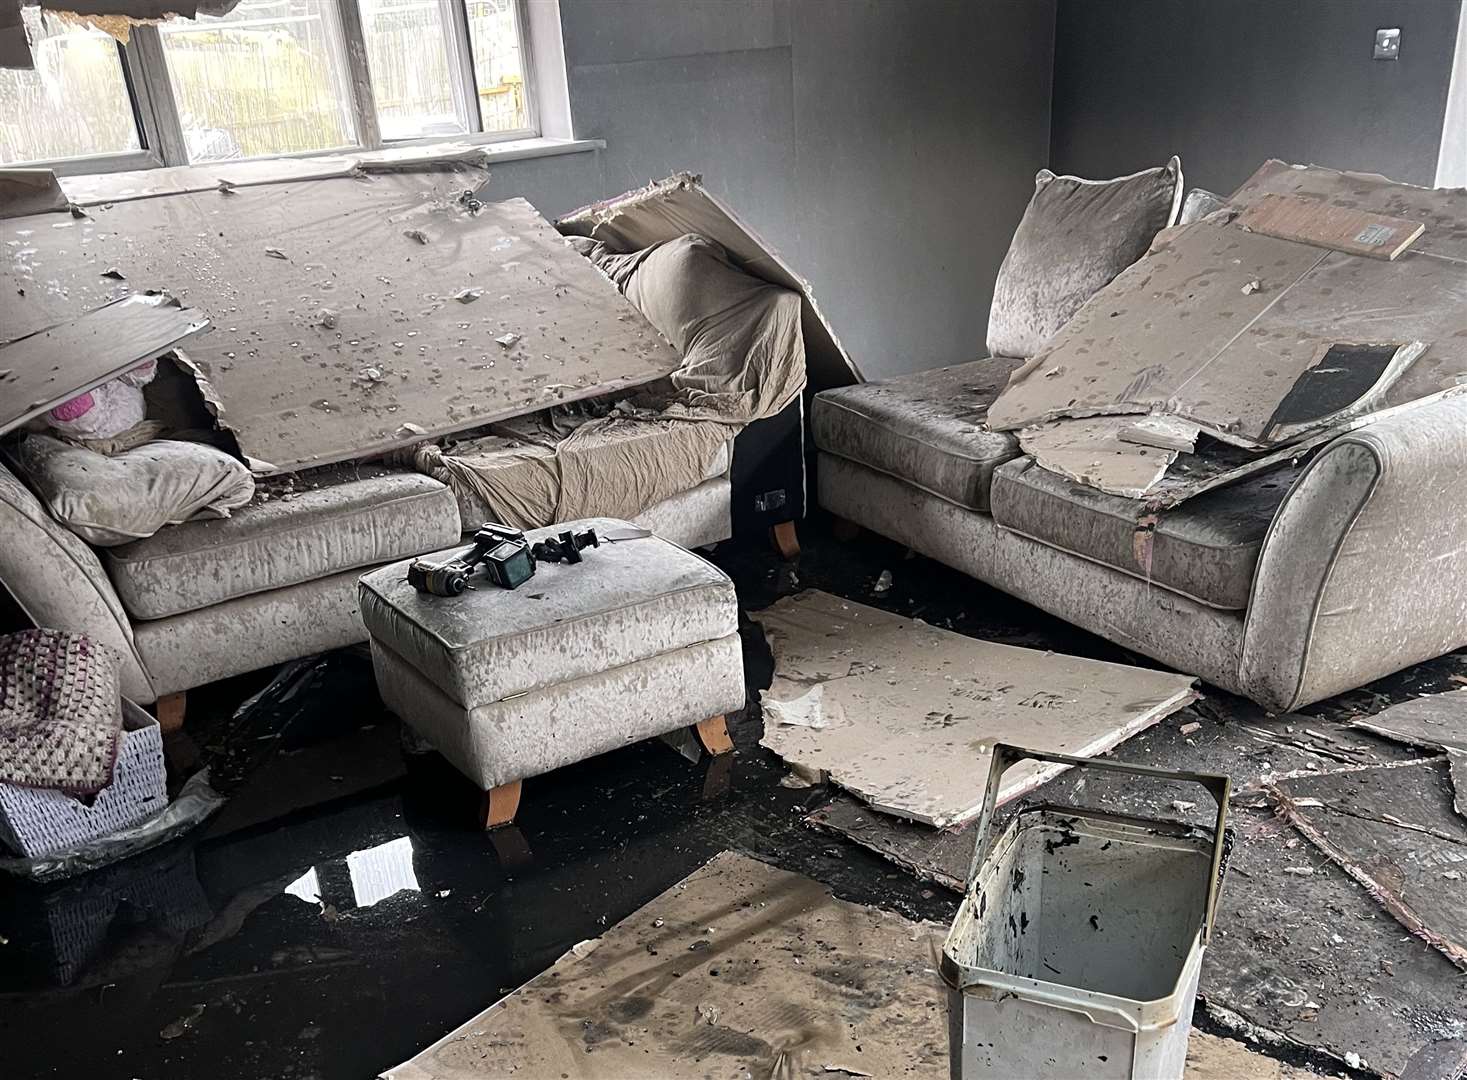 Furniture has also been destroyed